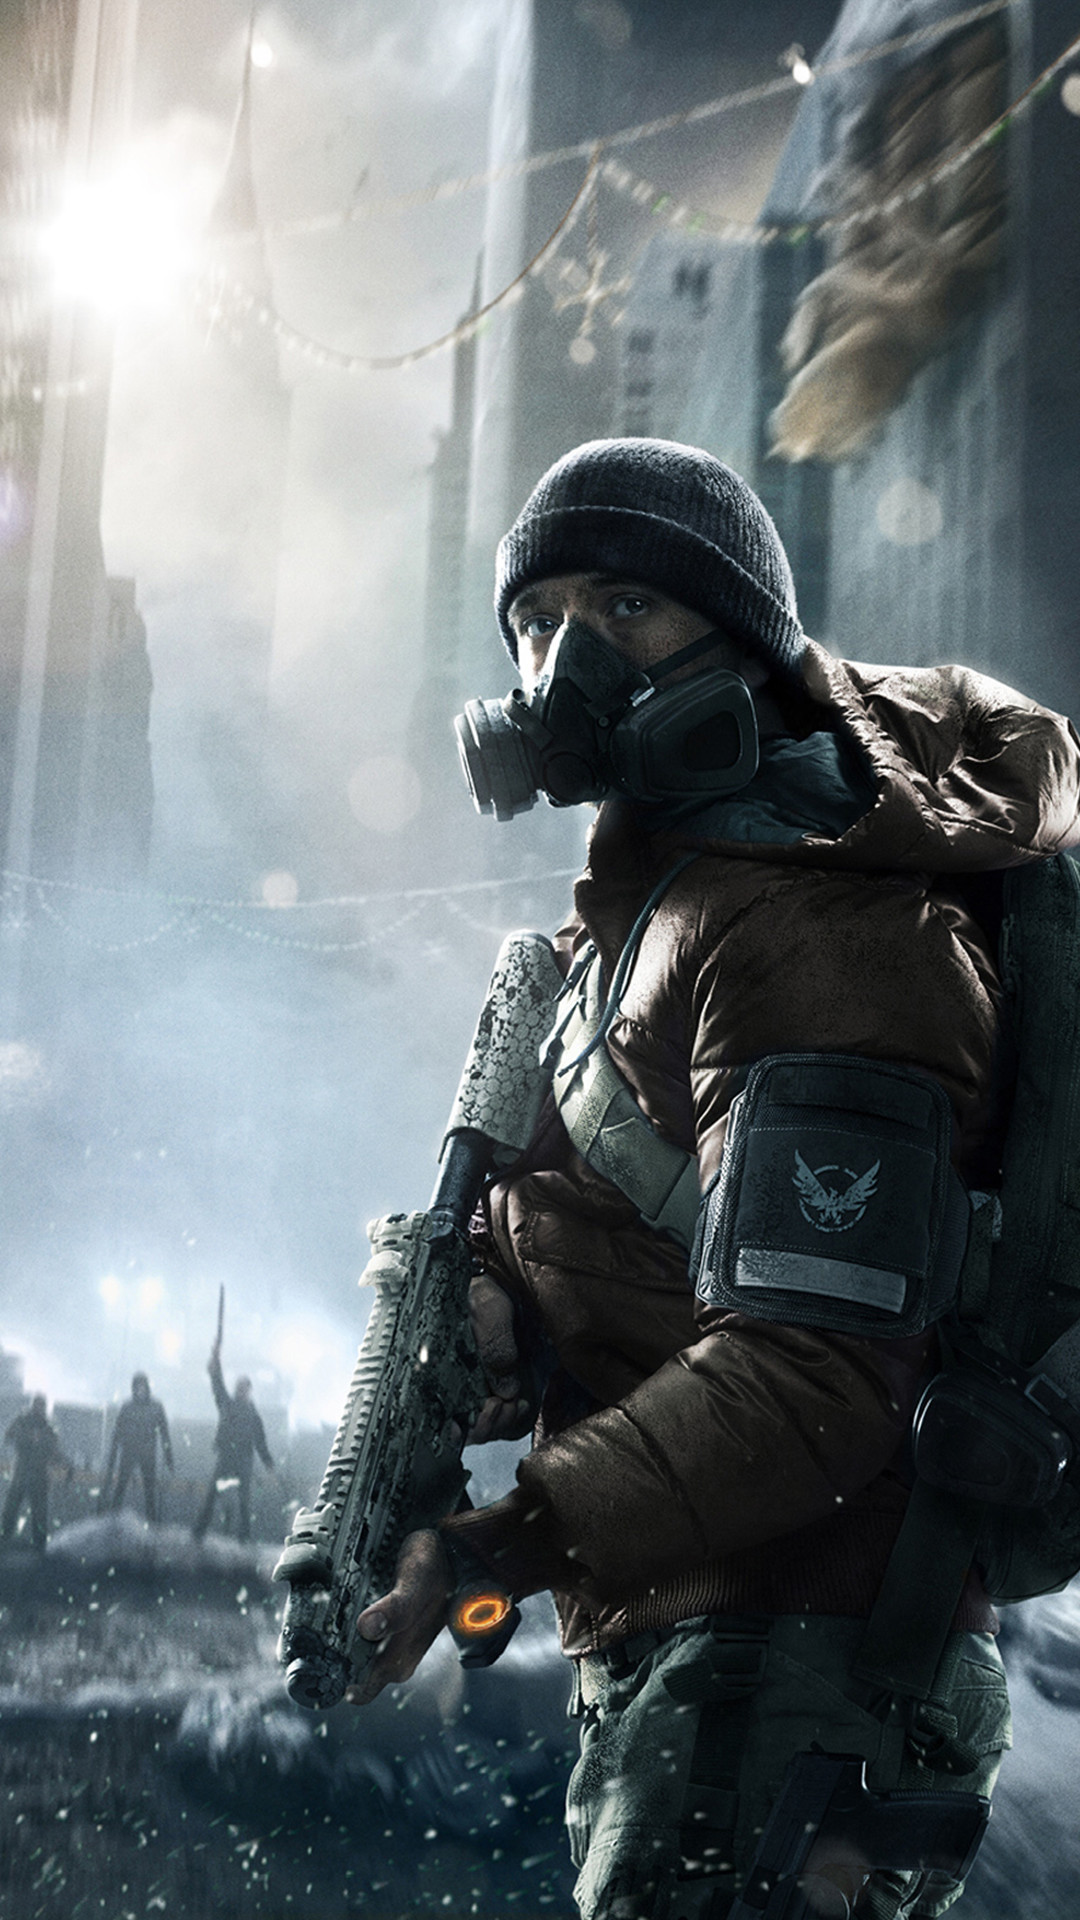 the division wallpaper 4k,action adventure game,pc game,shooter game,soldier,movie